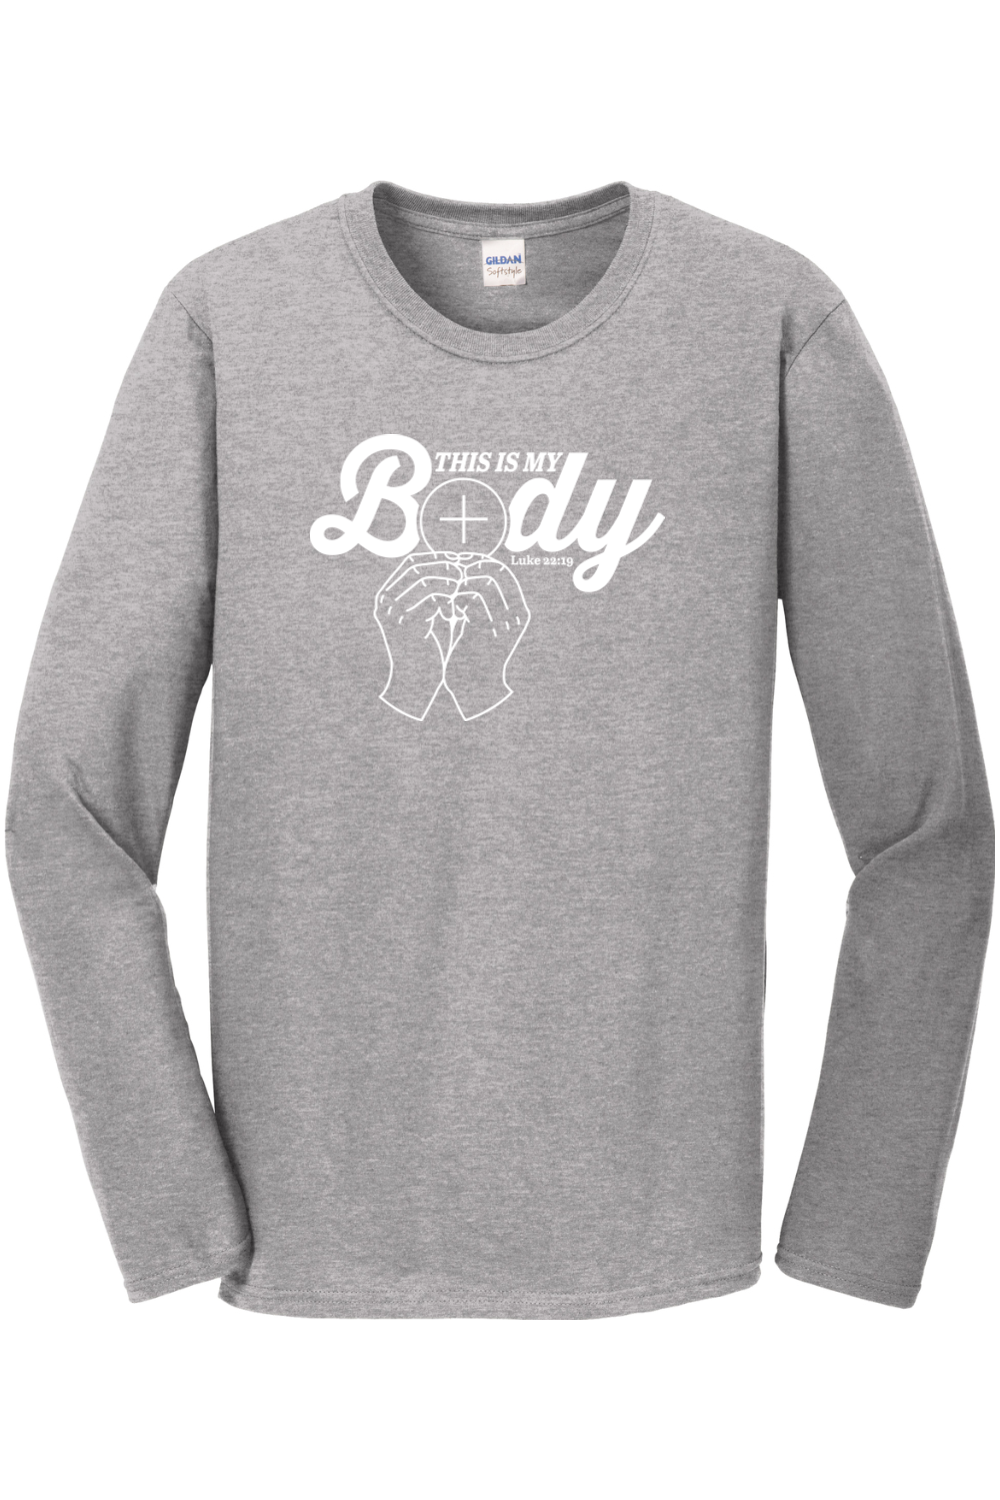 This is My Body, Consecration Luke 22:19 Long Sleeve